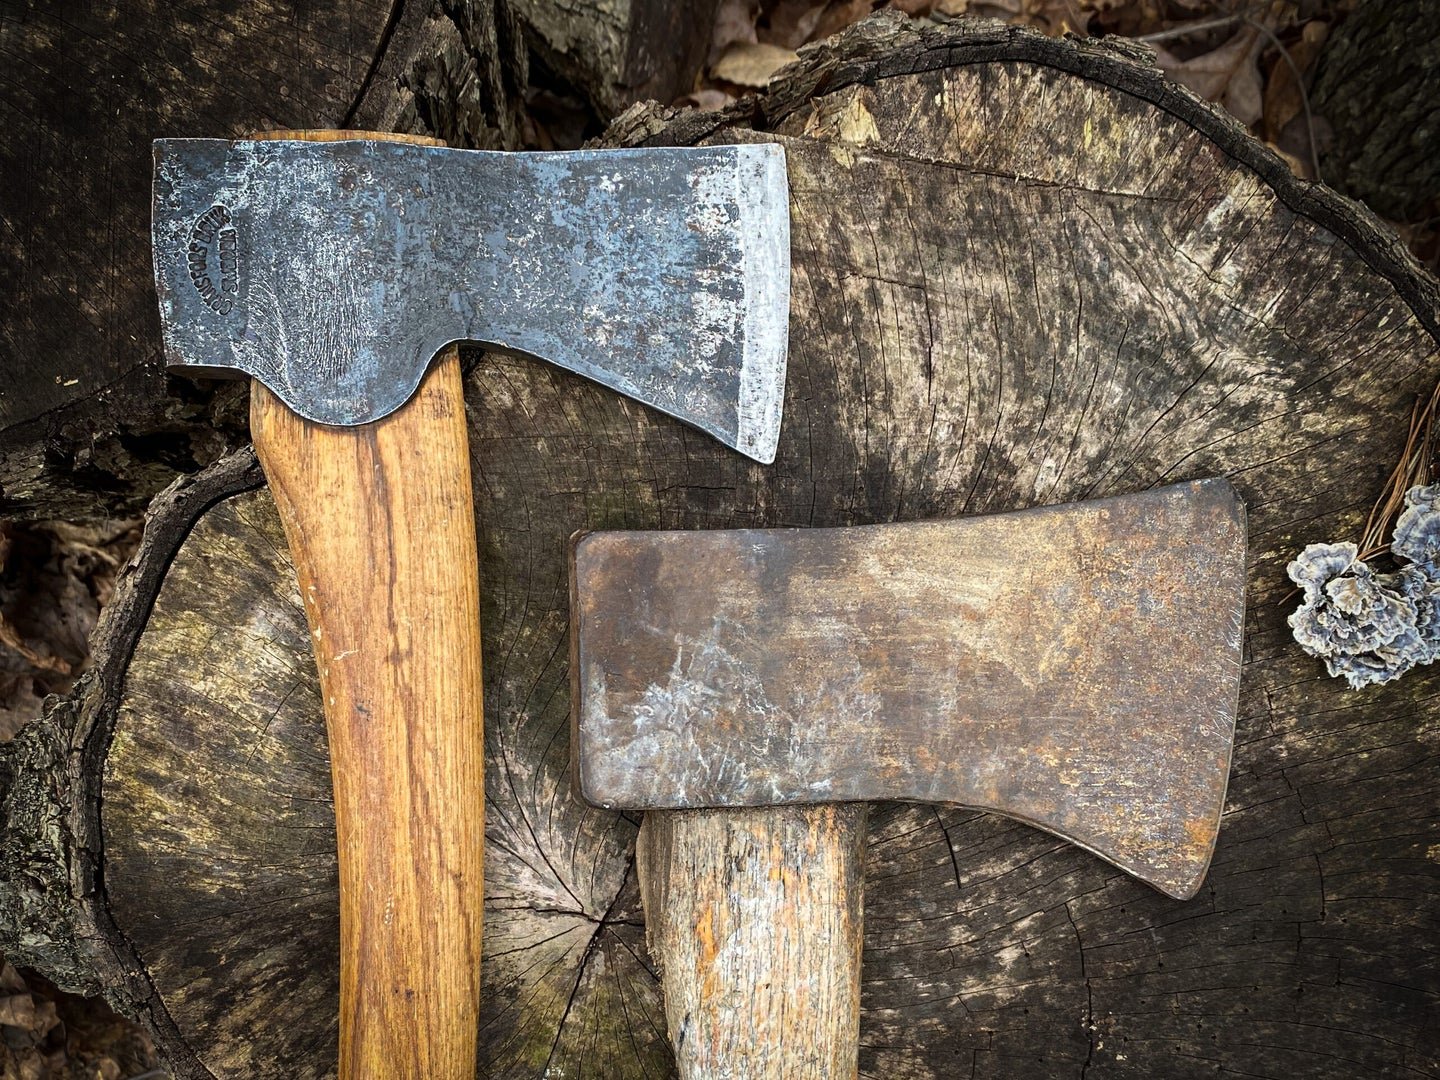 The correct and only way to sharpen an axe - cover